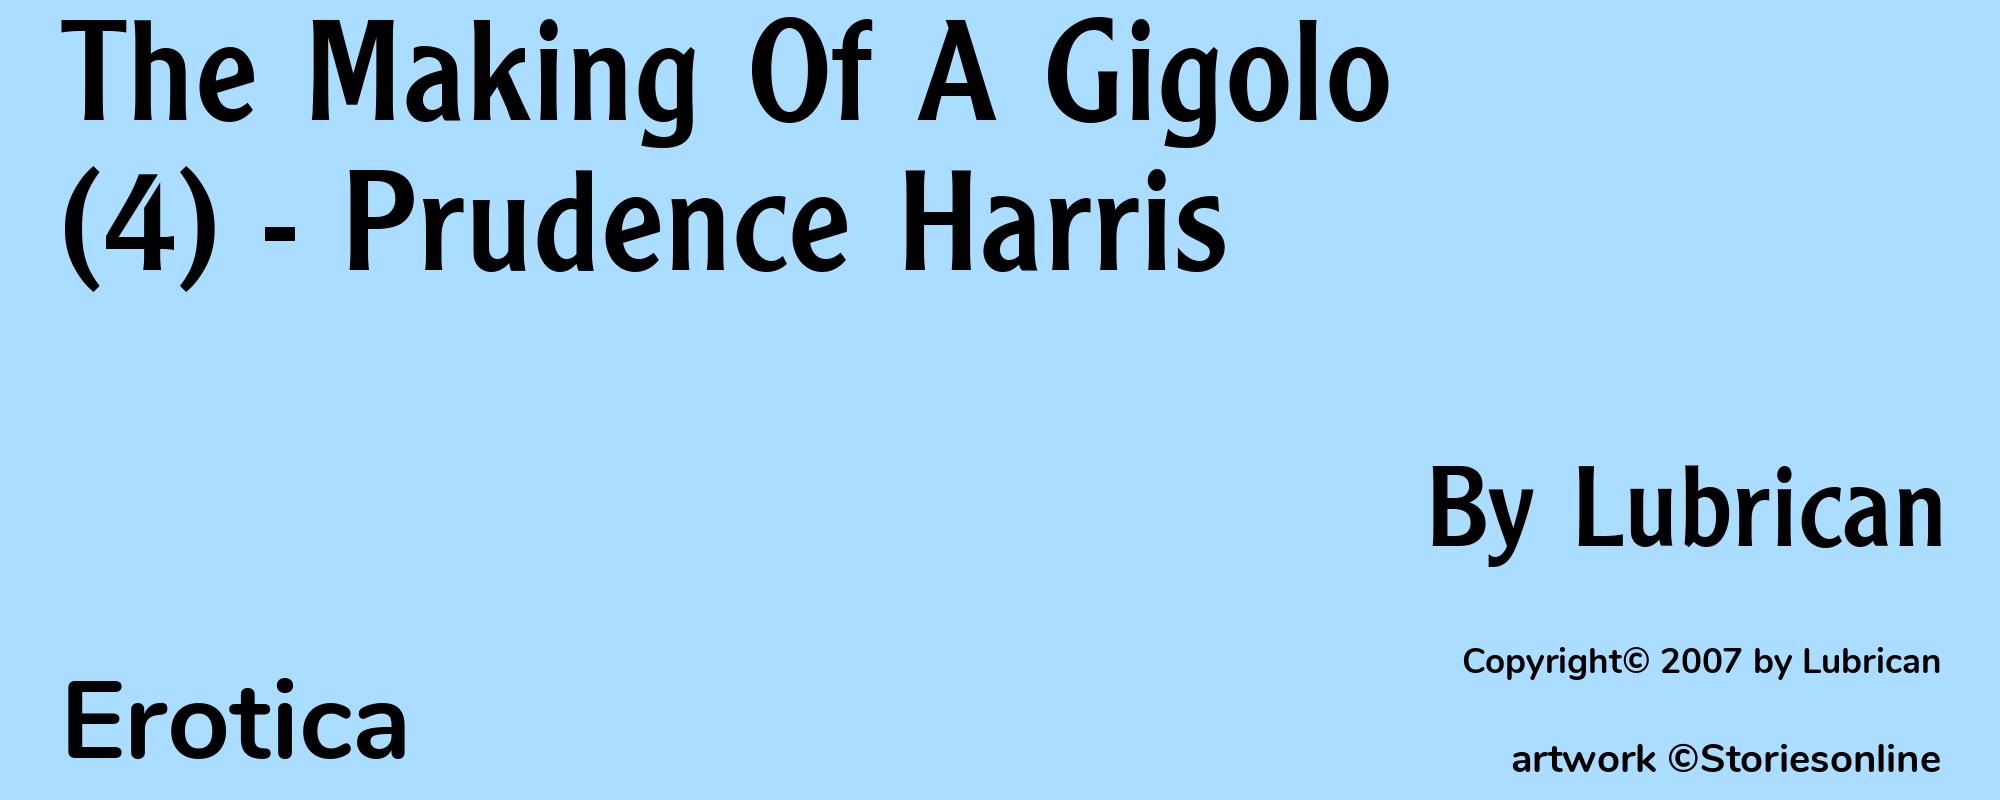 The Making Of A Gigolo (4) - Prudence Harris - Cover